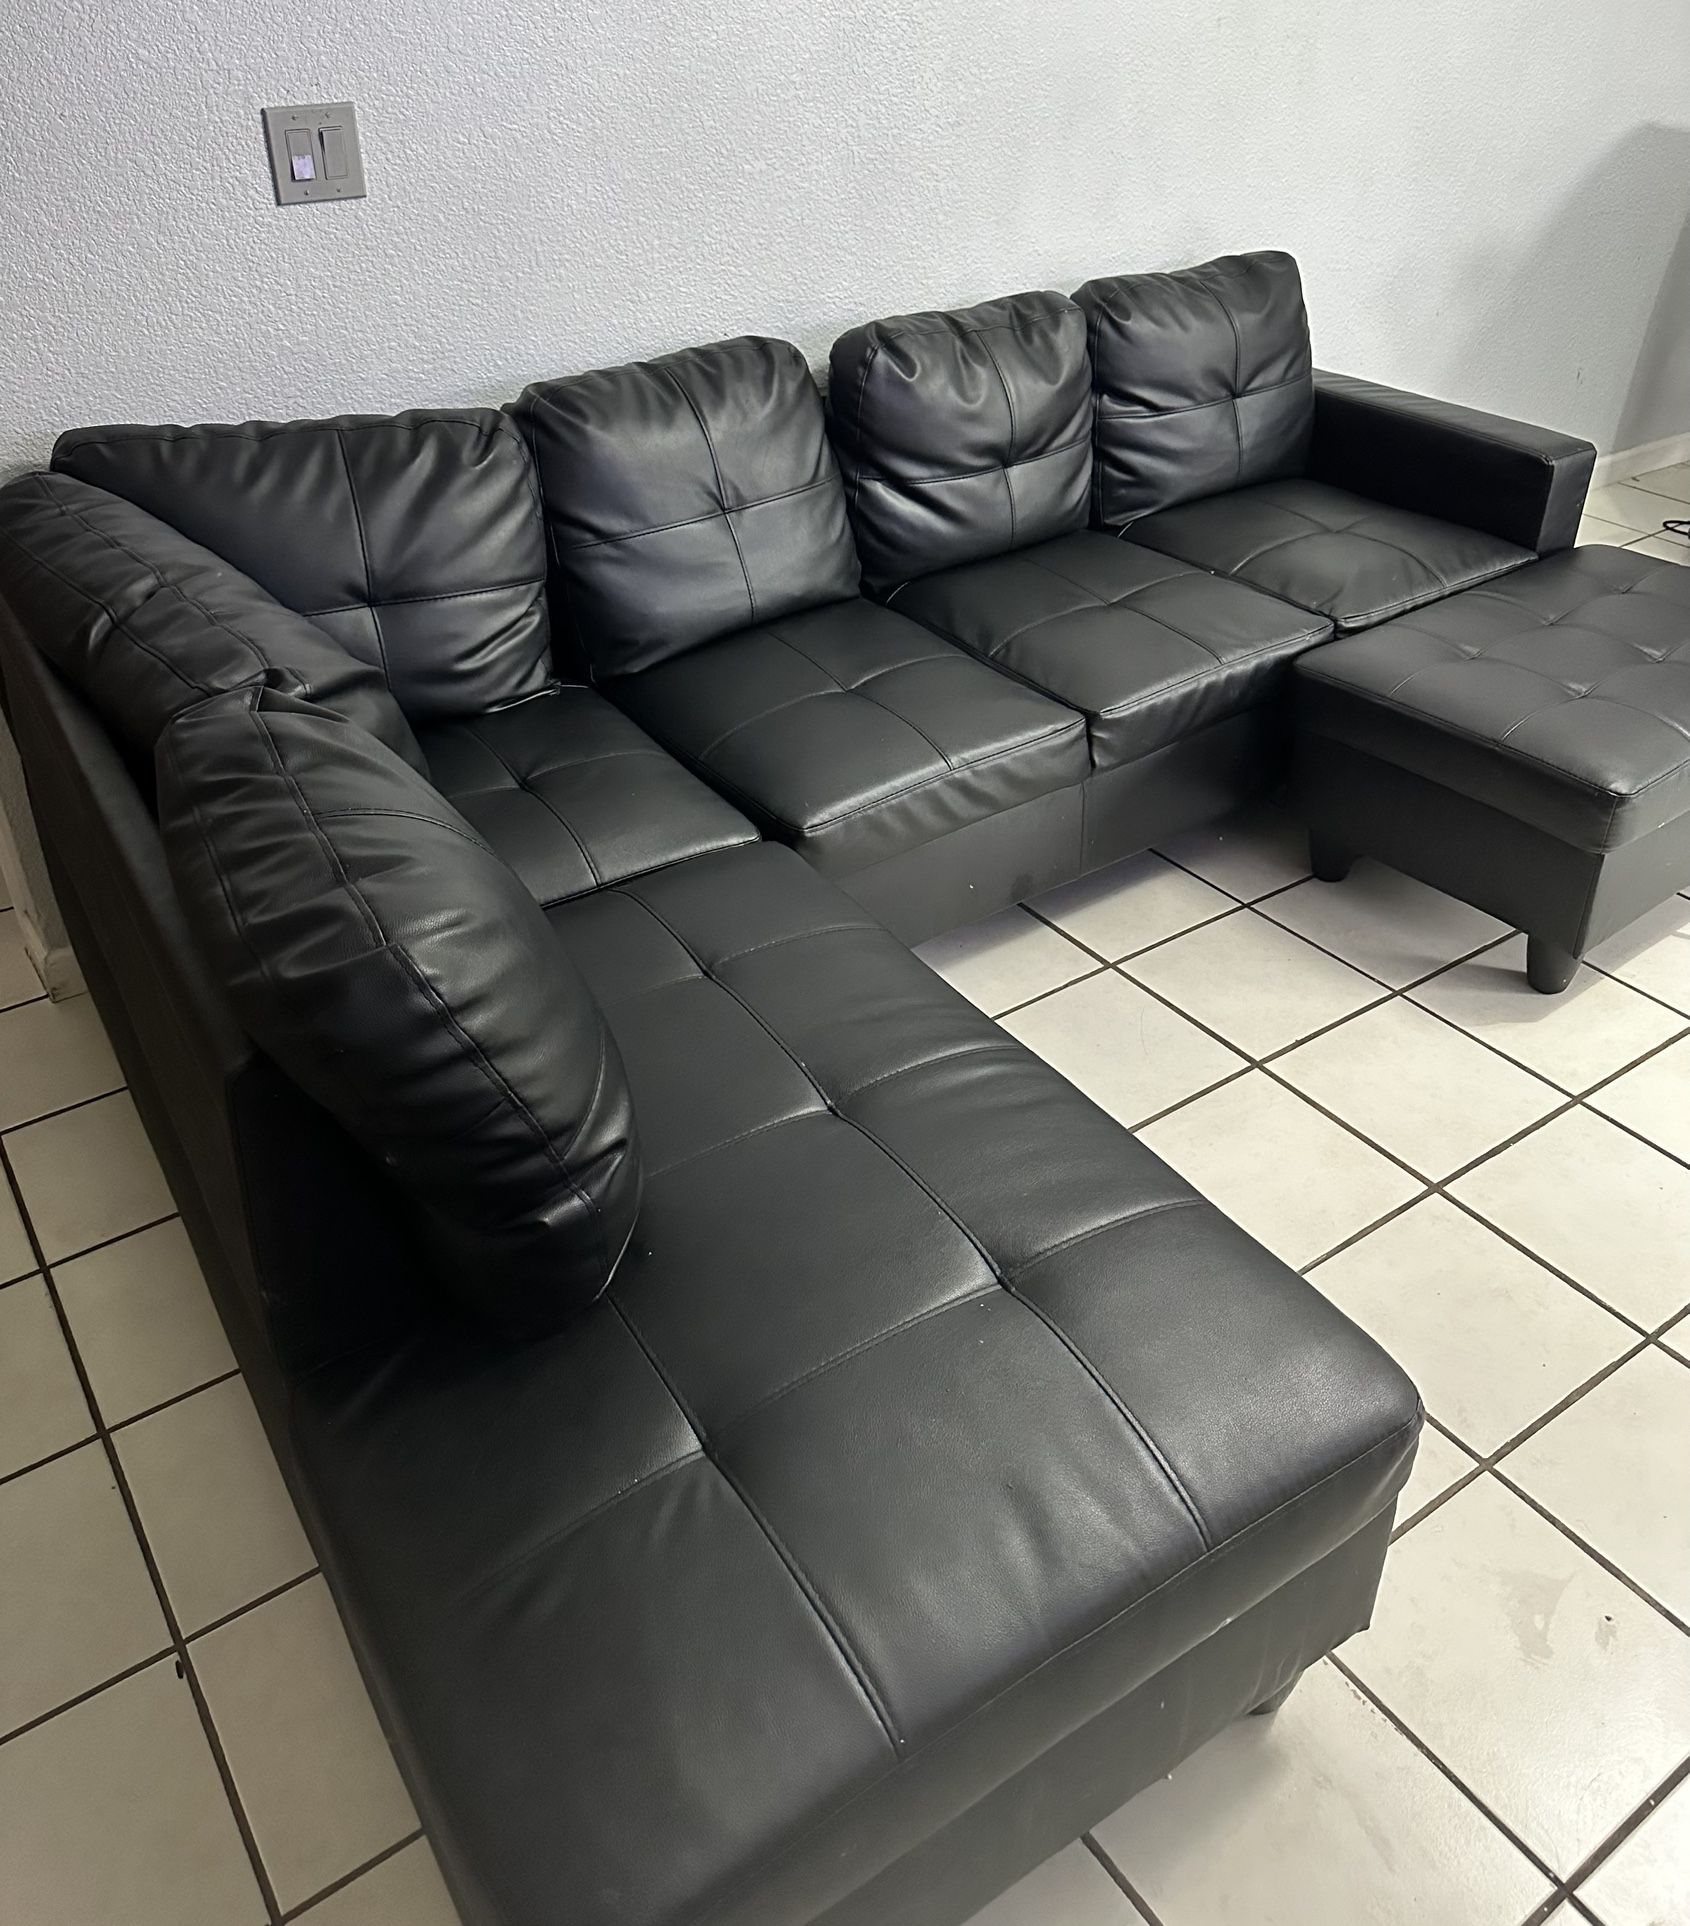 L Shape Black leather Couch